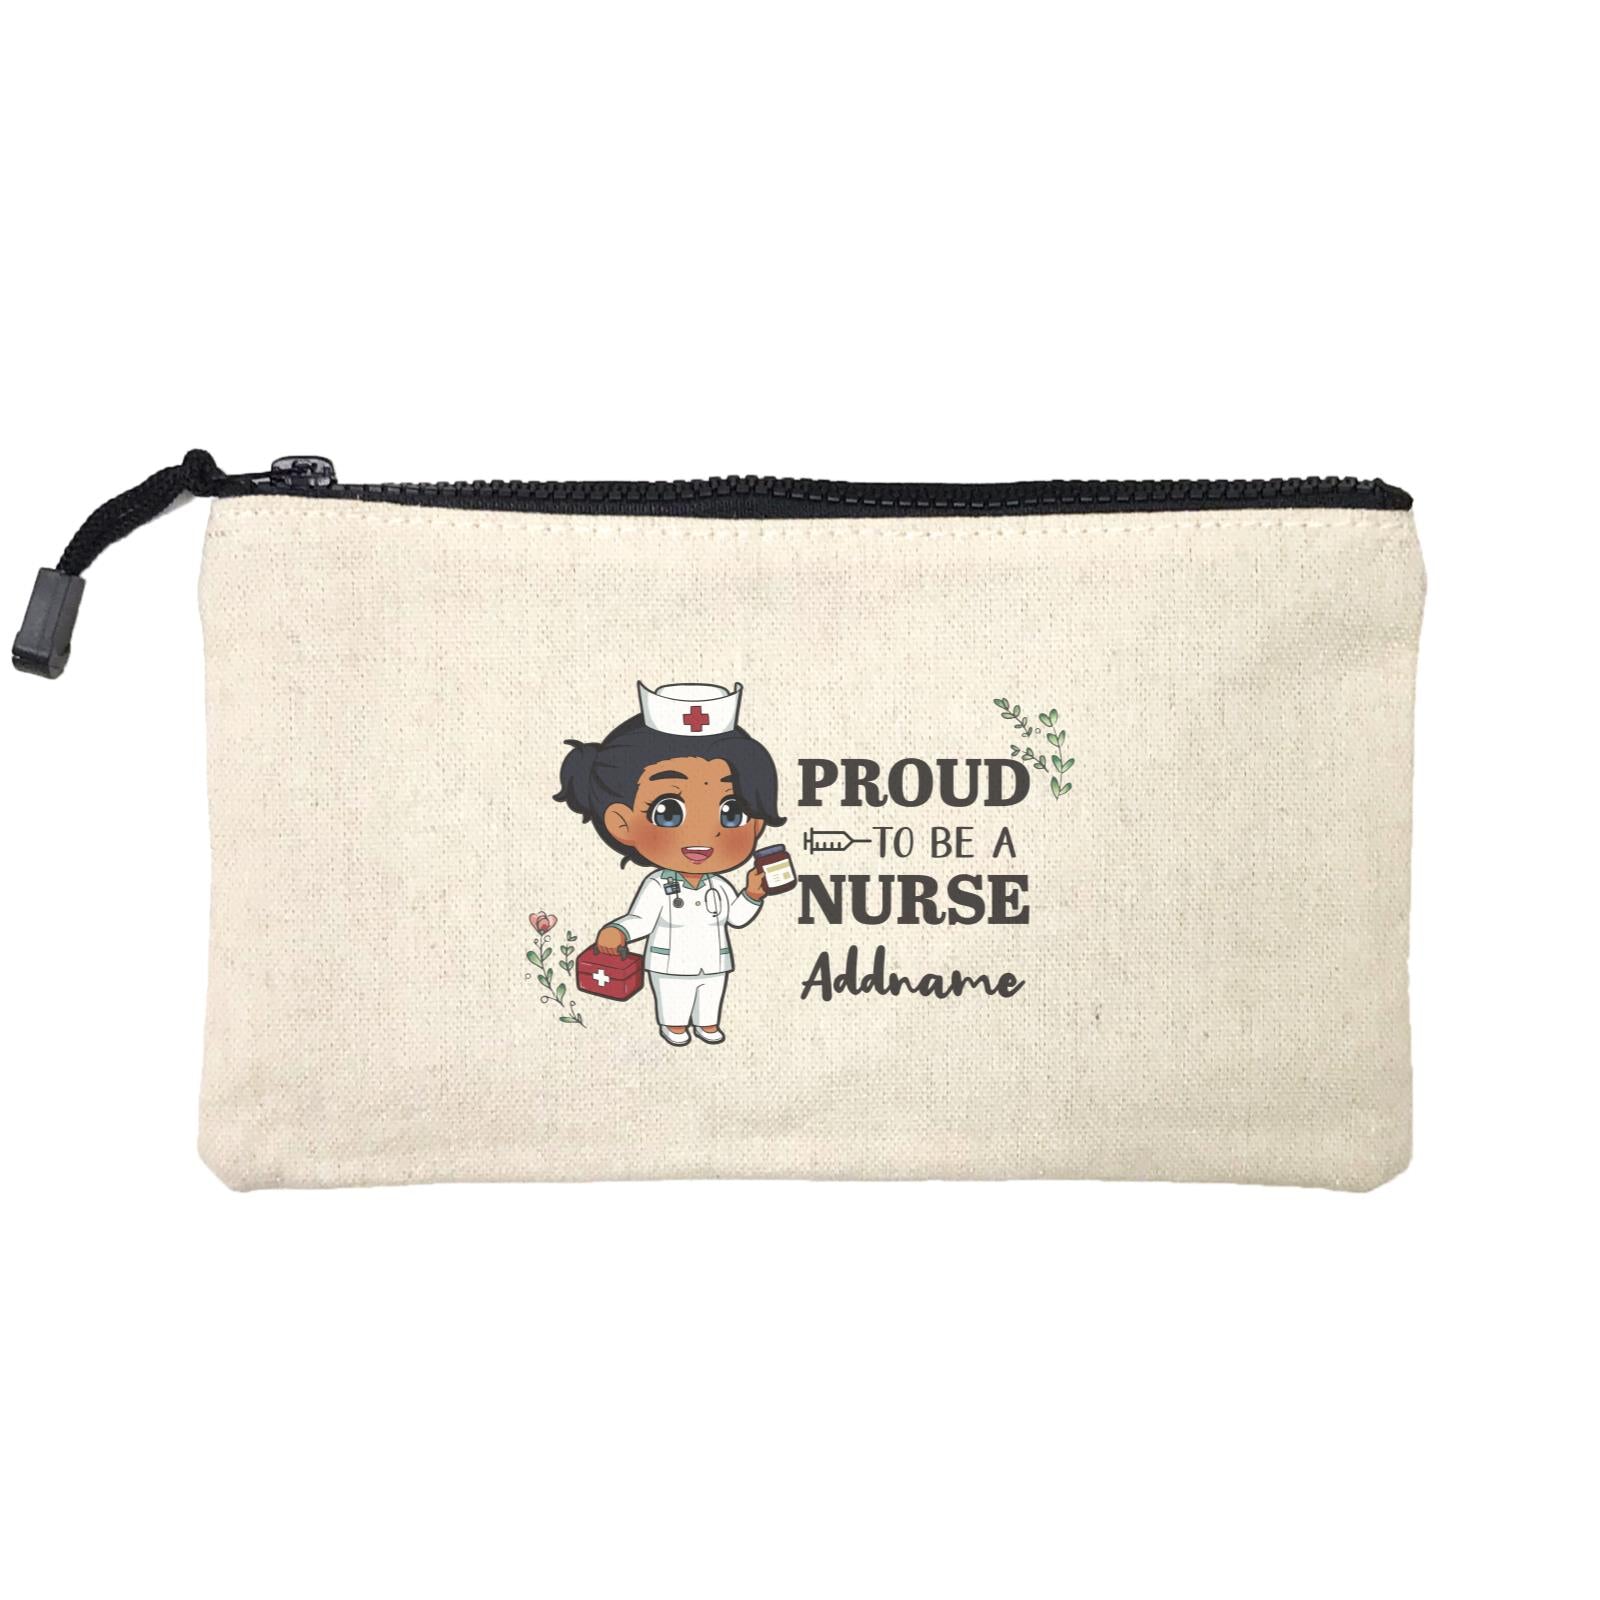 Proud To Be A Nurse Chibi Female Indian Mini Accessories Stationery Pouch